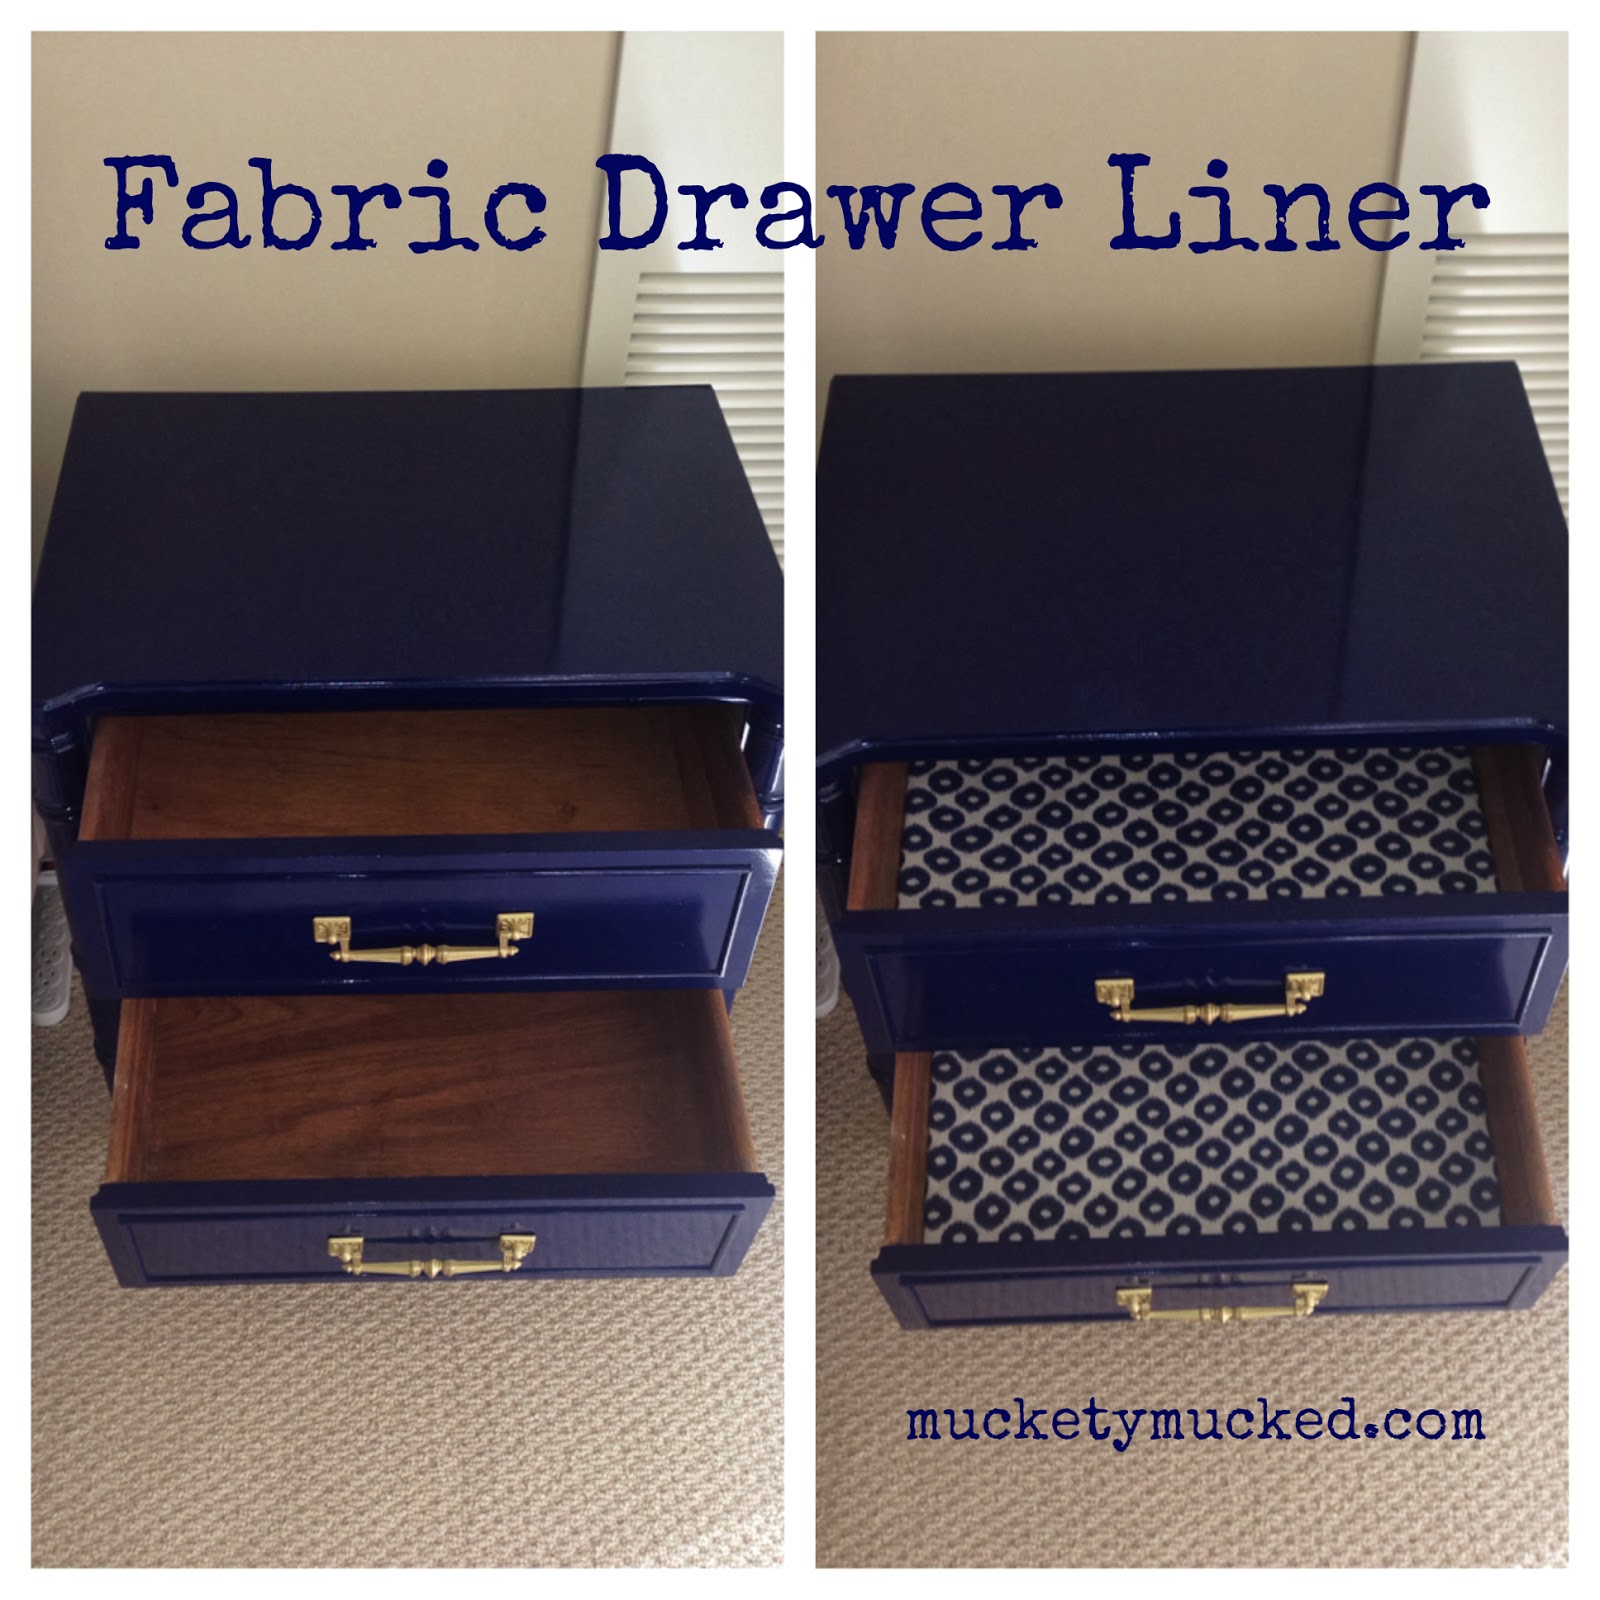 Lining Drawers with Fabric